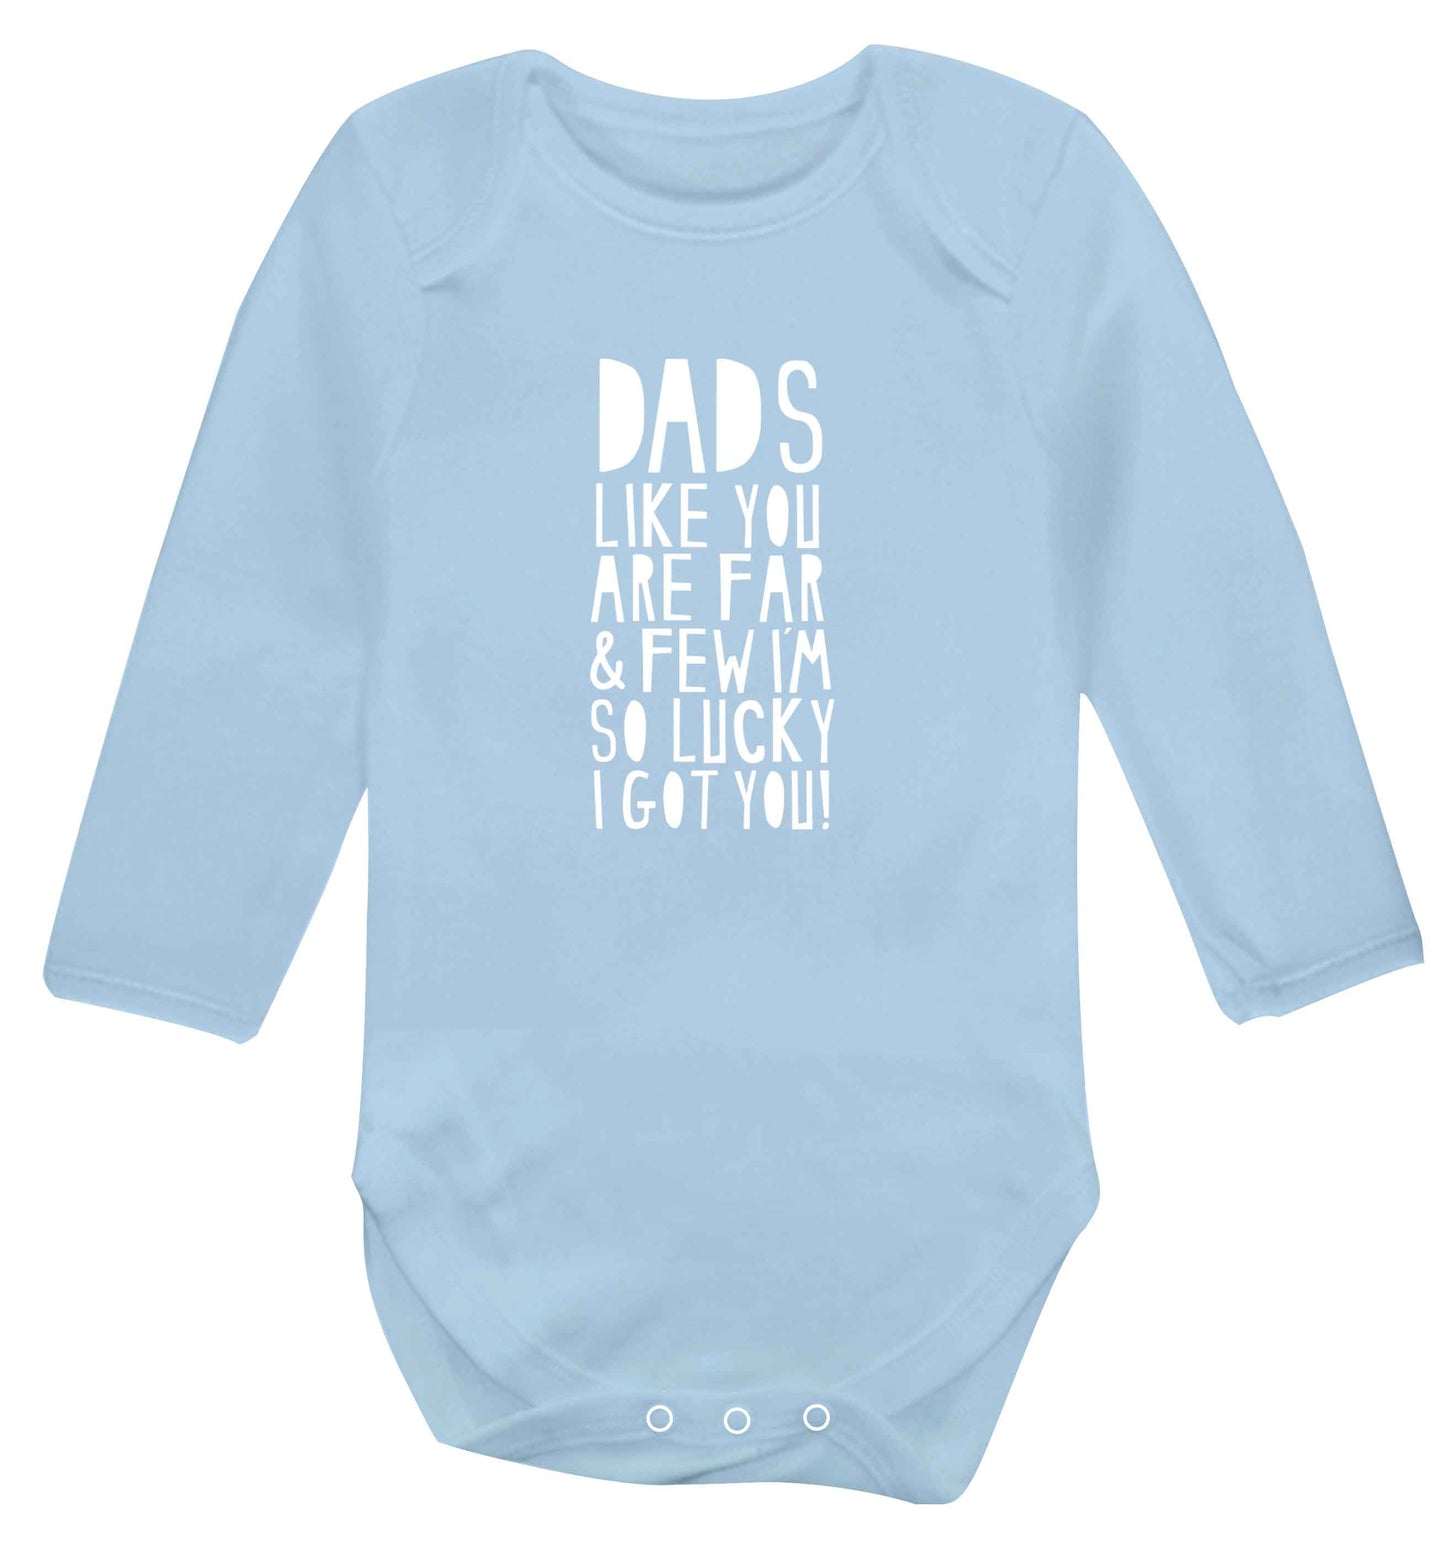 Dads like you are far and few I'm so luck I got you! baby vest long sleeved pale blue 6-12 months